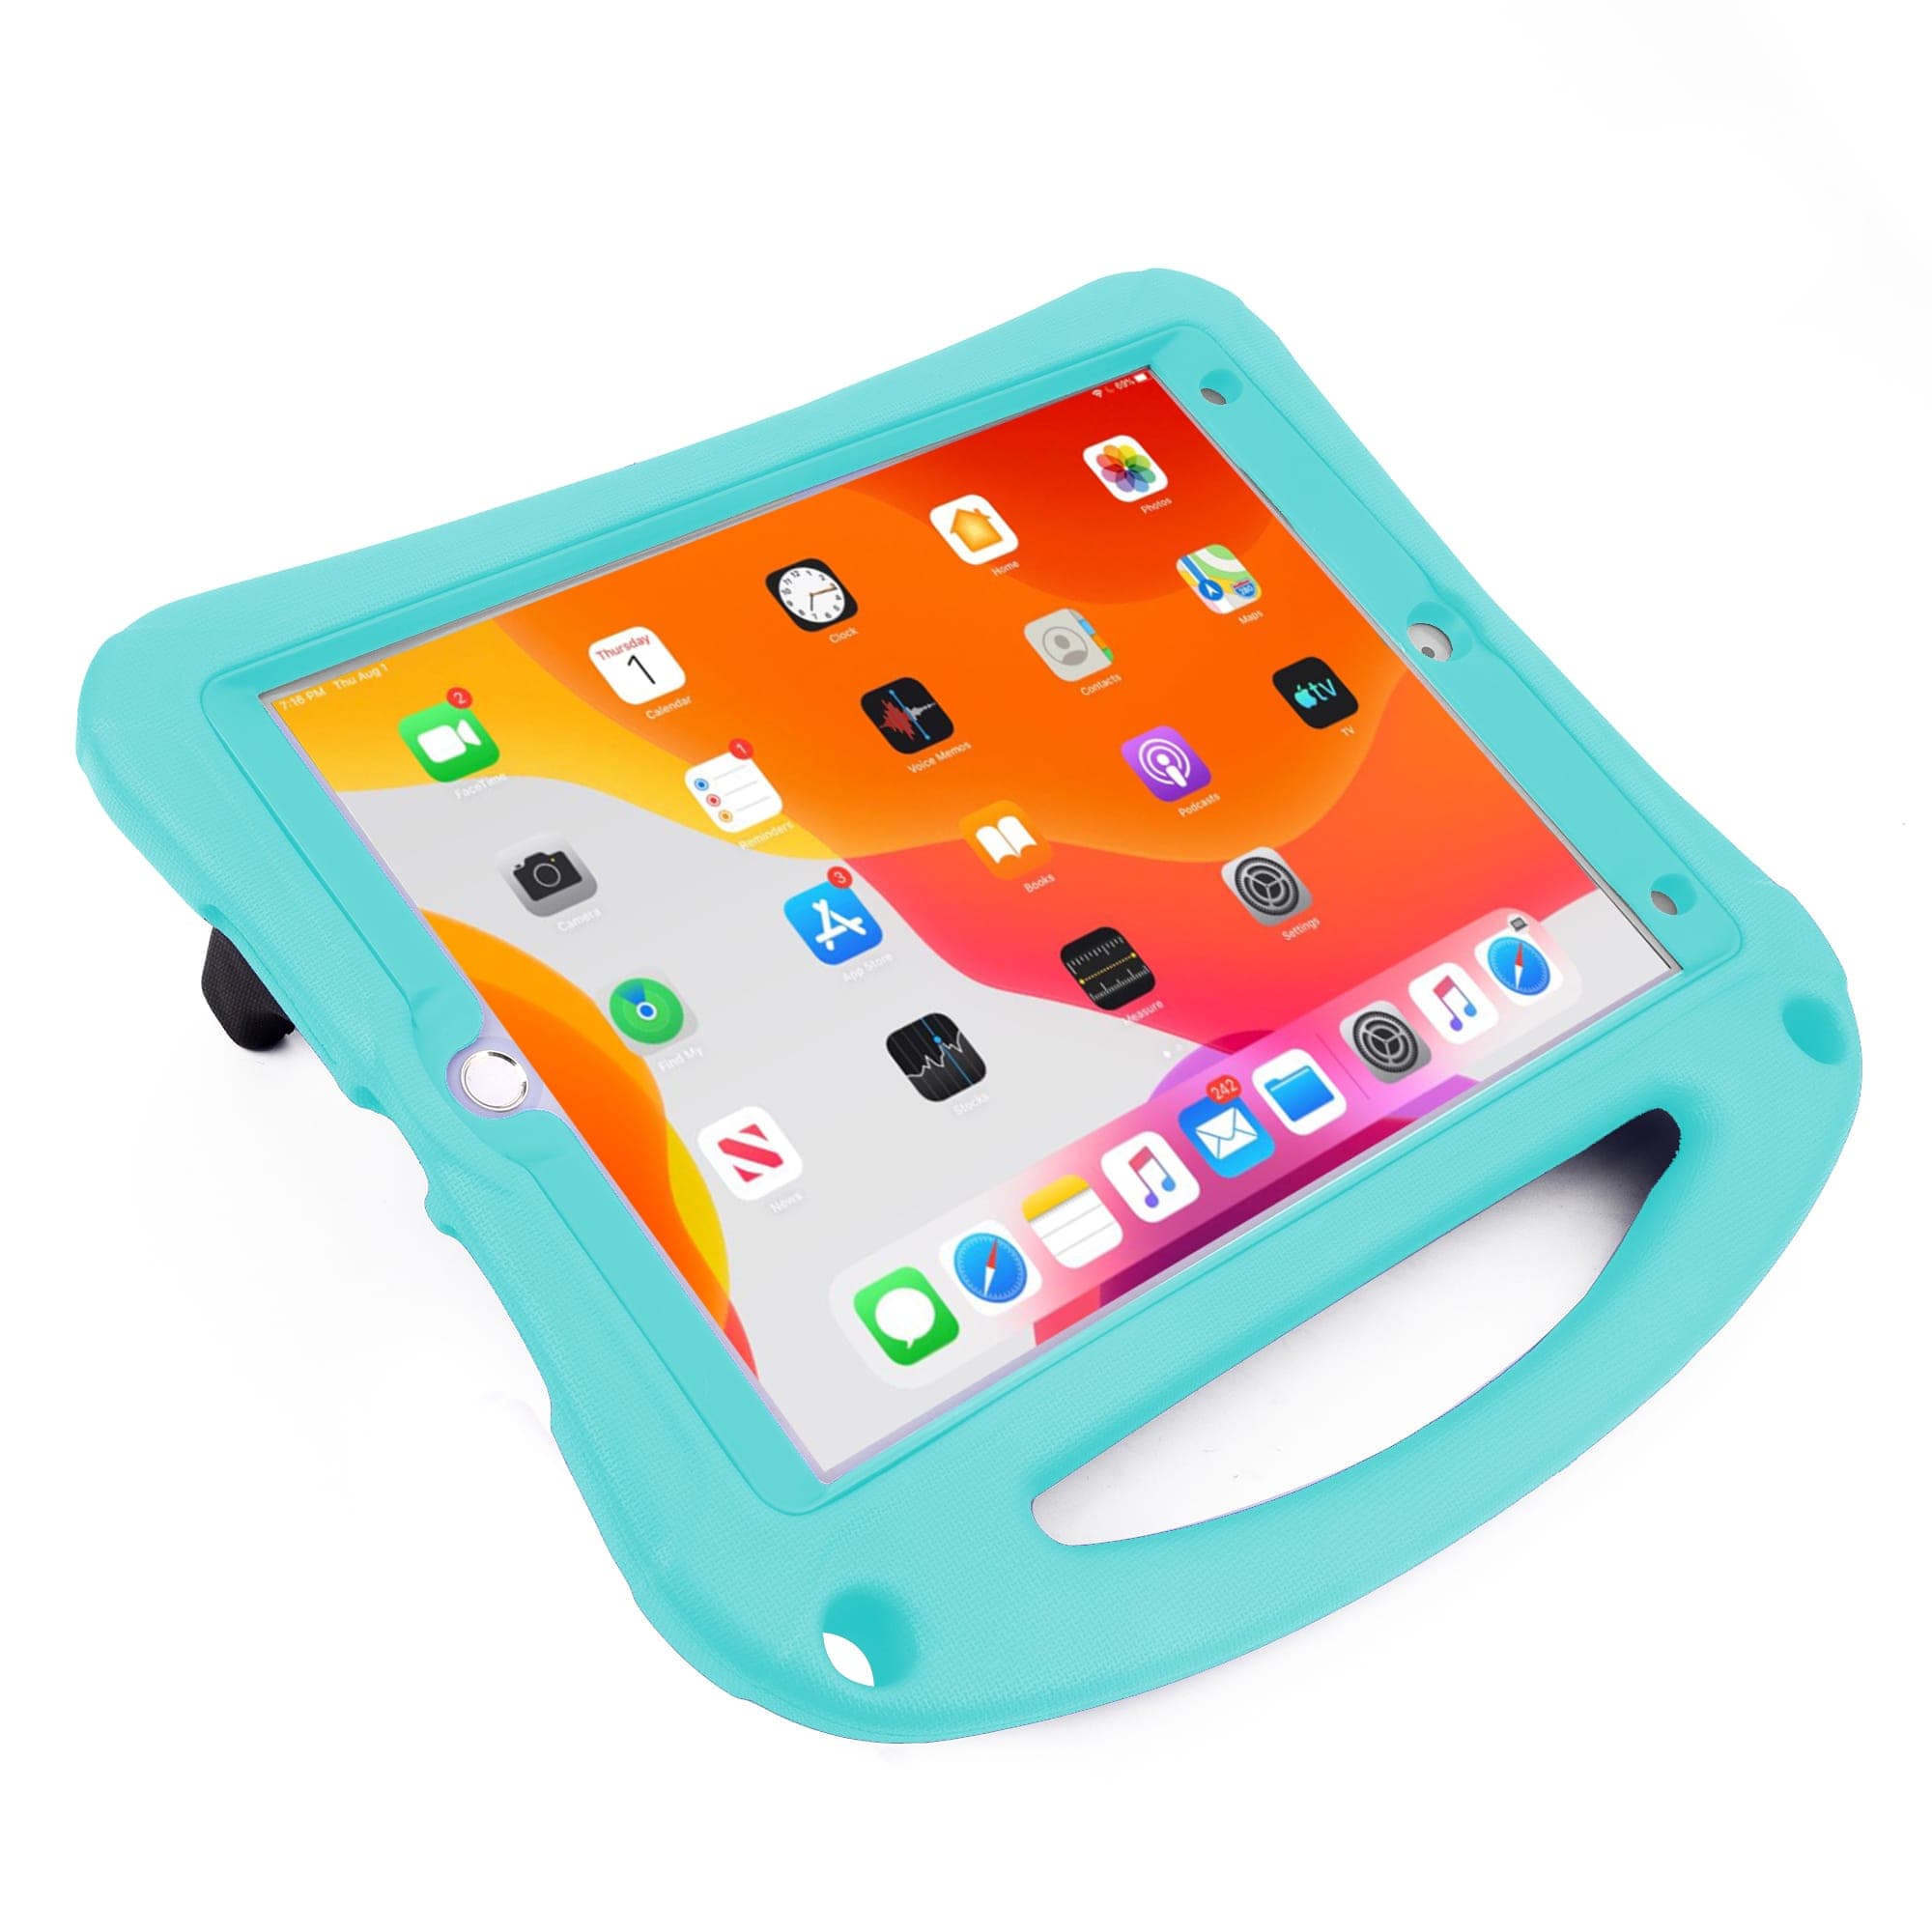 Bam Bino Space Suit case for 10.2 iPad (9th-8th-7th Gen) – Tablet2Cases